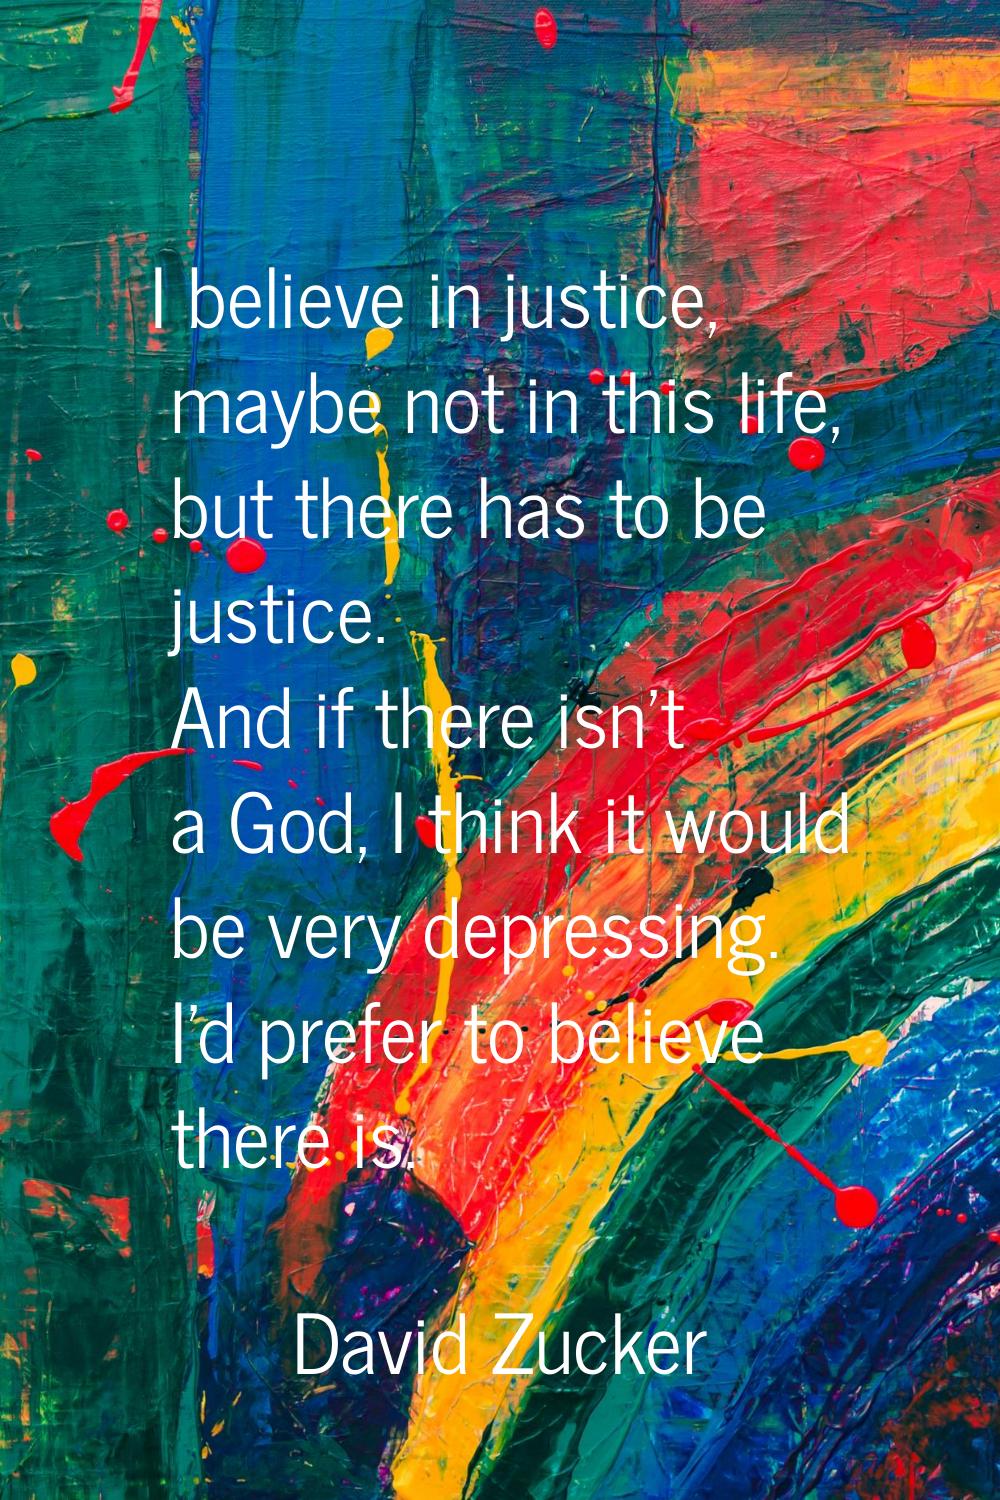 I believe in justice, maybe not in this life, but there has to be justice. And if there isn't a God